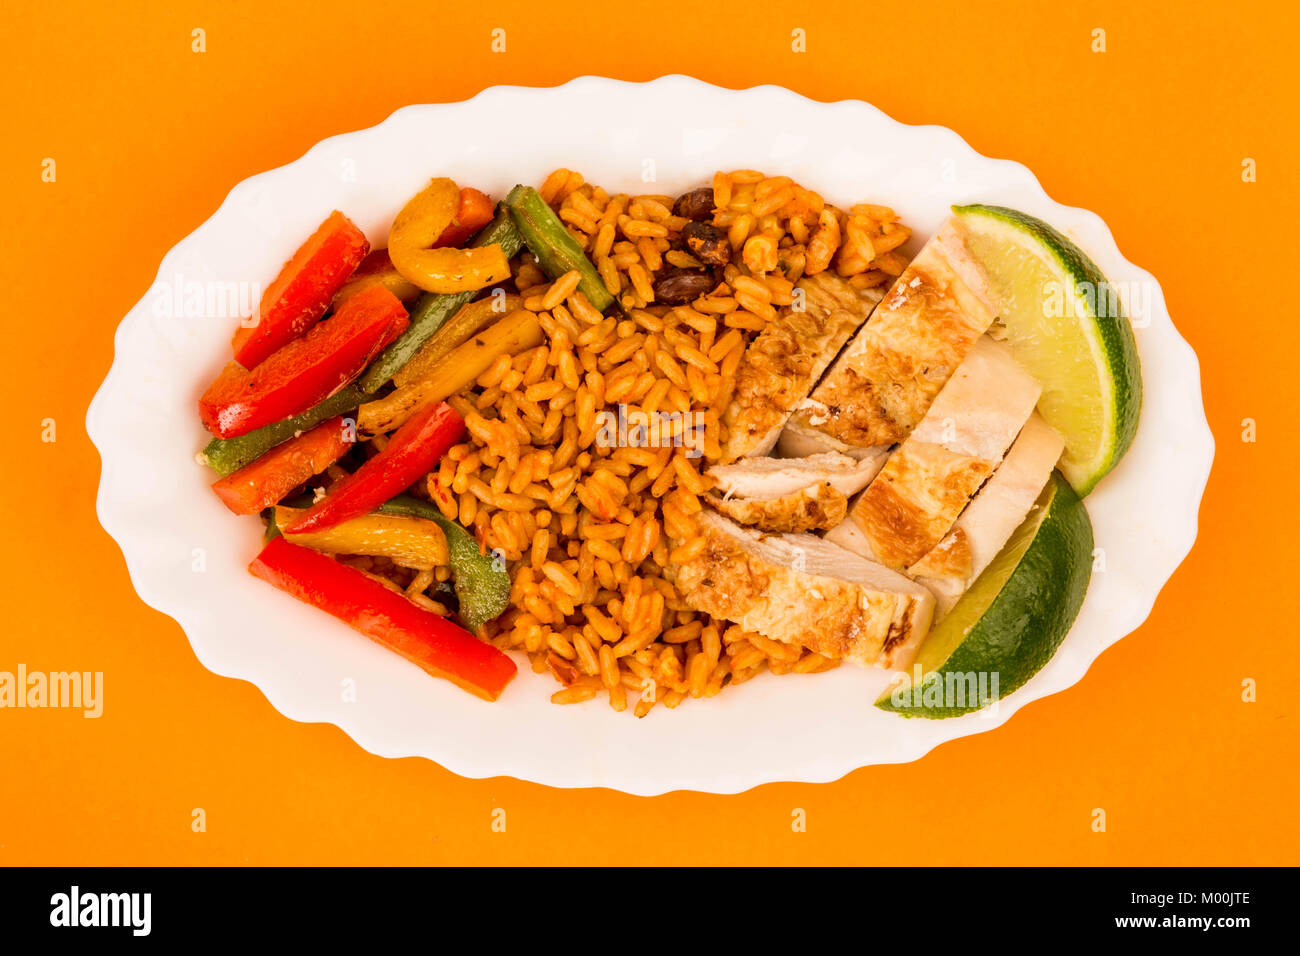 Mexican Style Chicken With Spicy Rice and Fried Peppers Against An Orange Background Stock Photo